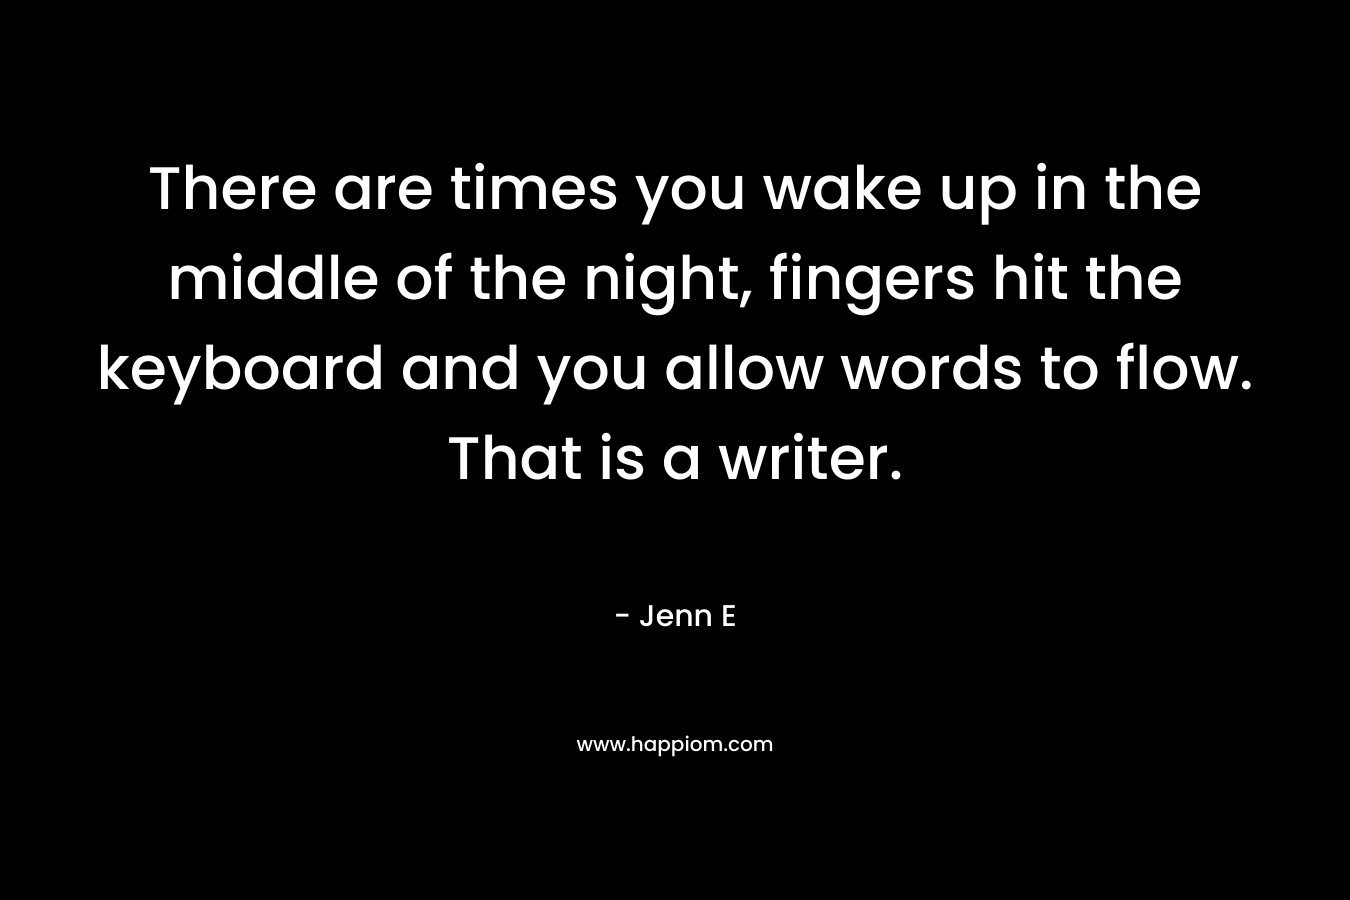 There are times you wake up in the middle of the night, fingers hit the keyboard and you allow words to flow. That is a writer.